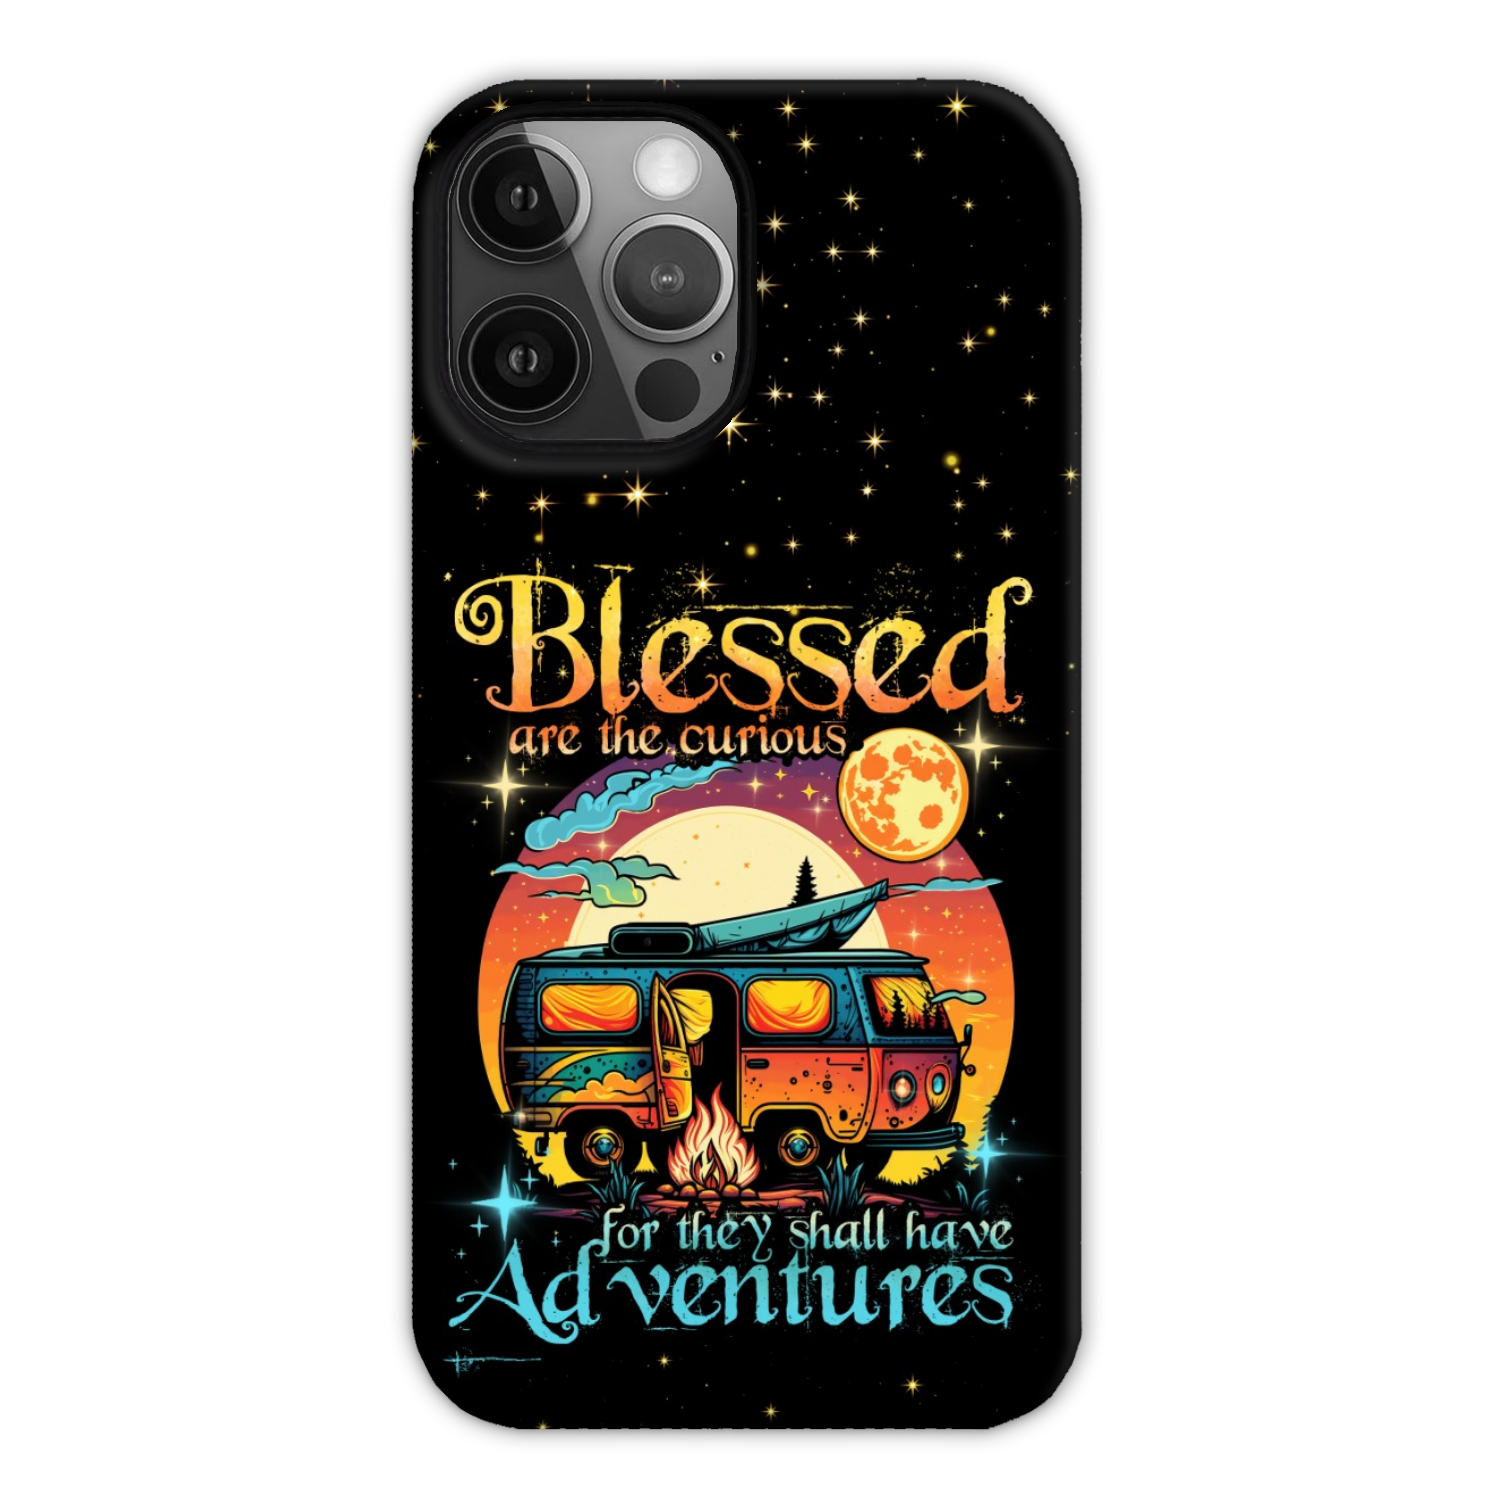 BLESSED ARE THE CURIOUS FOR THEY SHALL HAVE ADVENTURES PHONE CASE - TYTD2504233